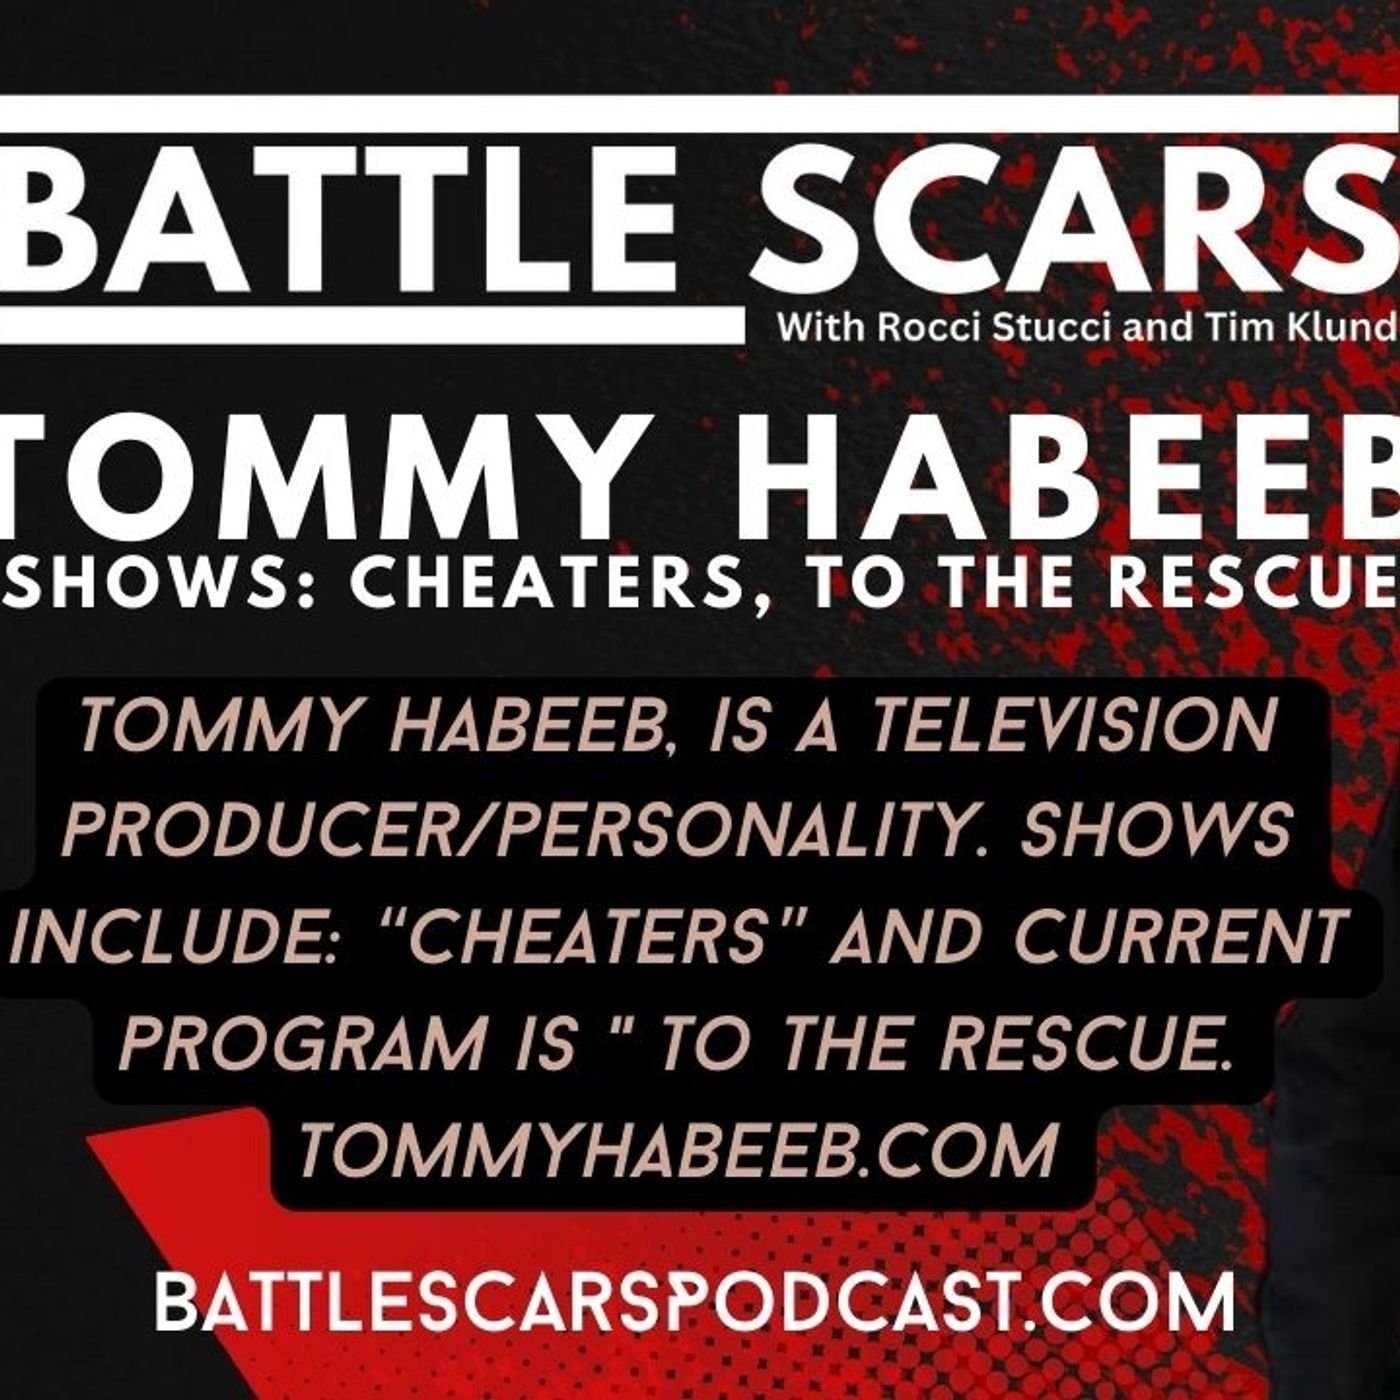 Get Ready to be Hooked: The Journey of Tommy Habeeb and his TV Shows Cheaters and To The Rescue!